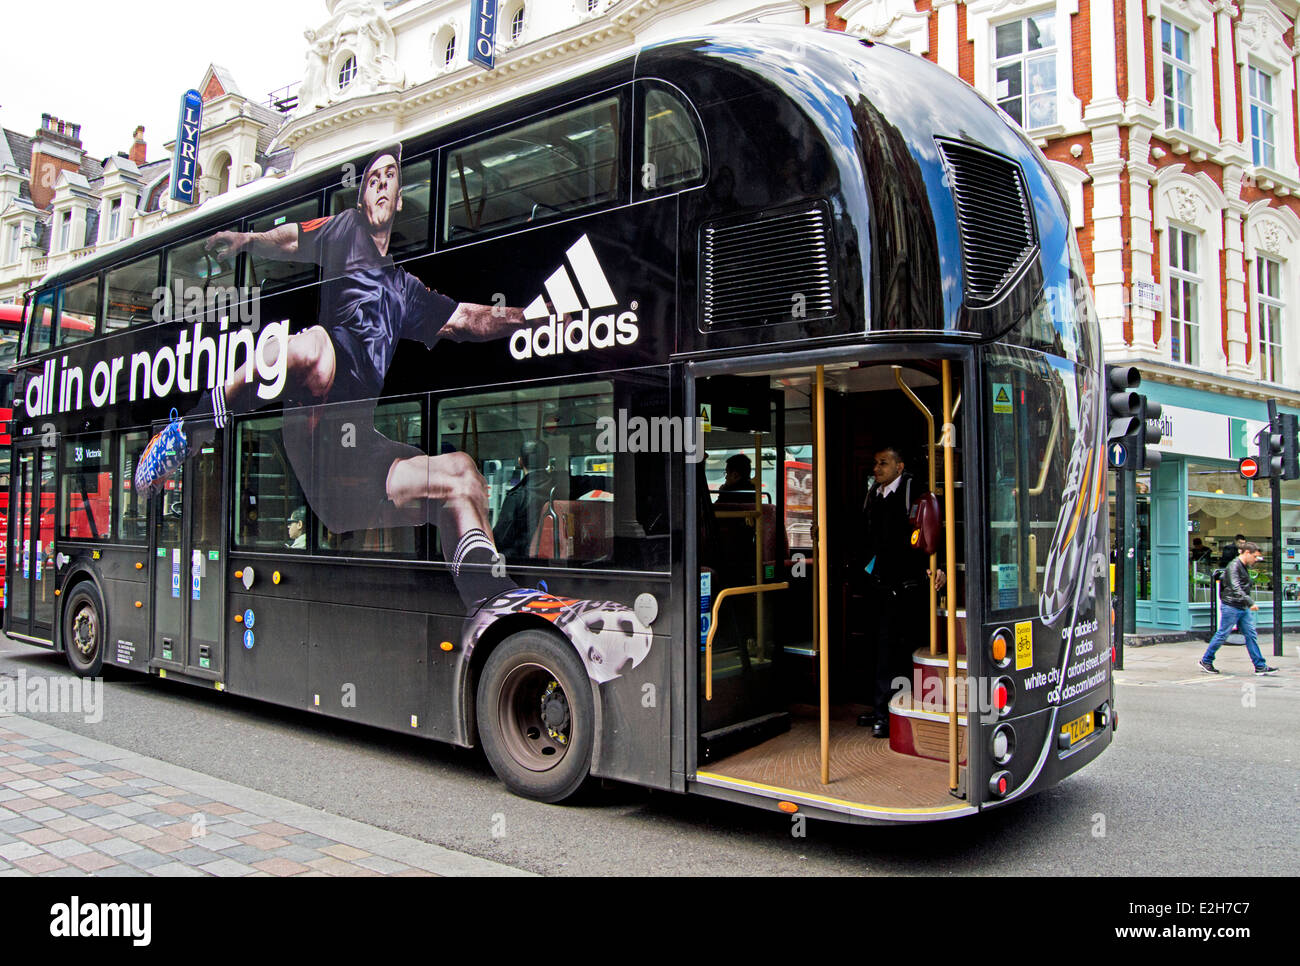 Adidas advertisement on the new Routemaster bus in Central London, England,  United Kingdom Stock Photo - Alamy